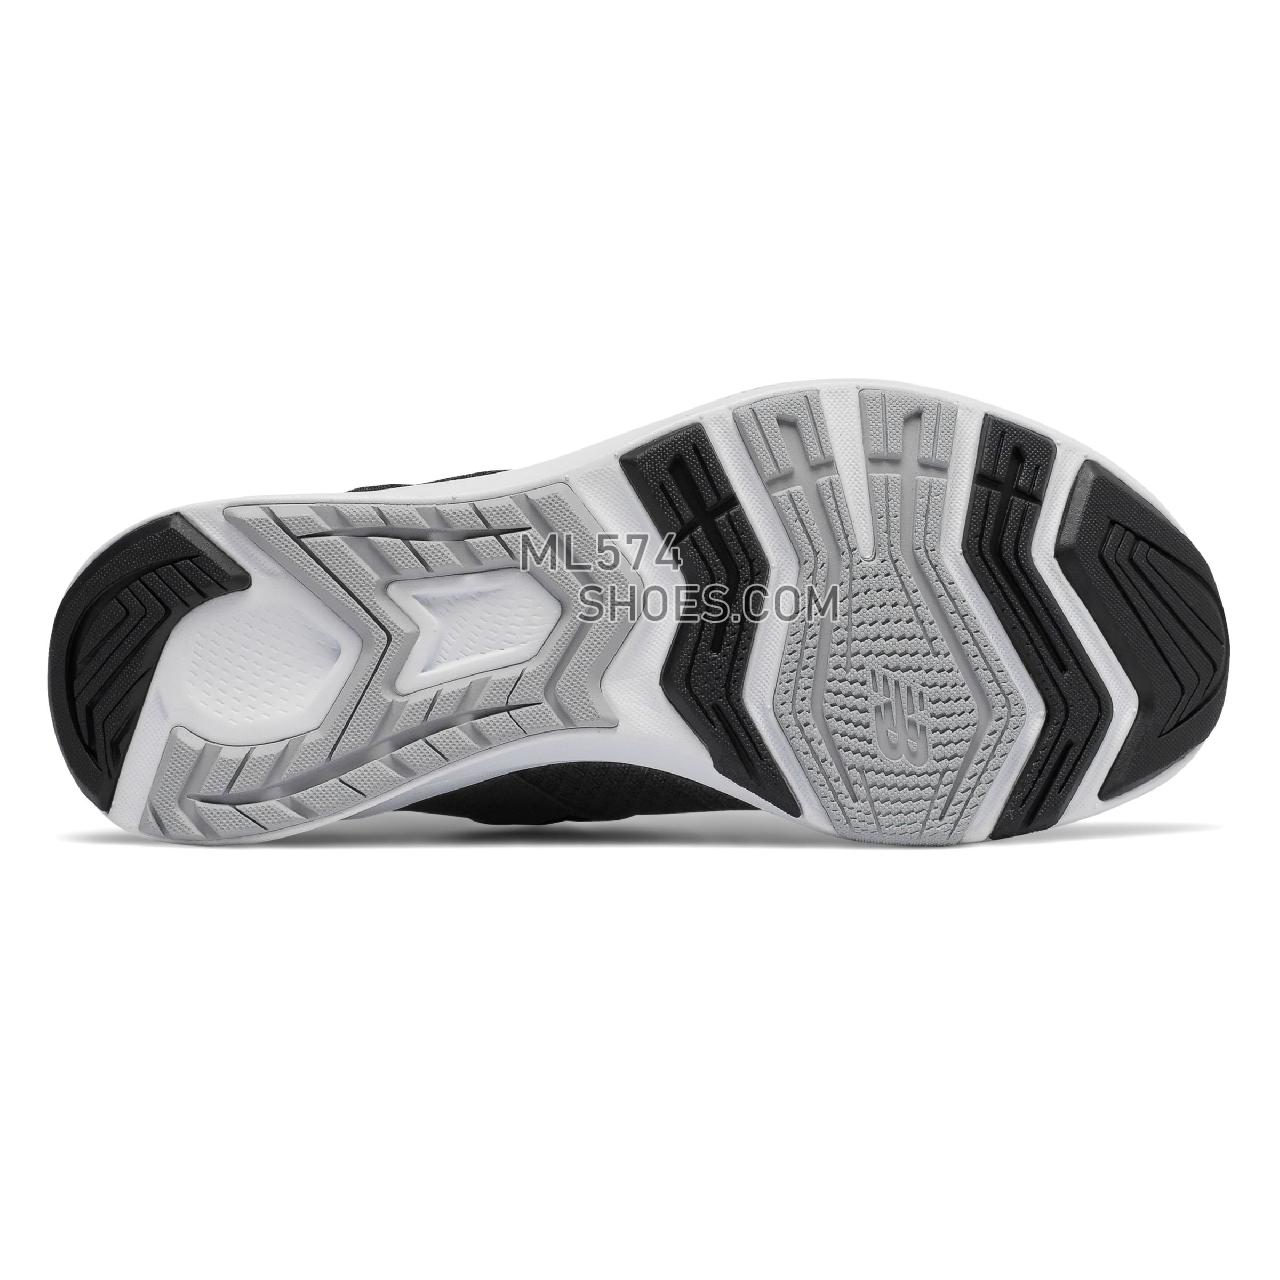 New Balance FuelCore NERGIZE - Women's  - X-training Black with Grey and White - WXNRGBK